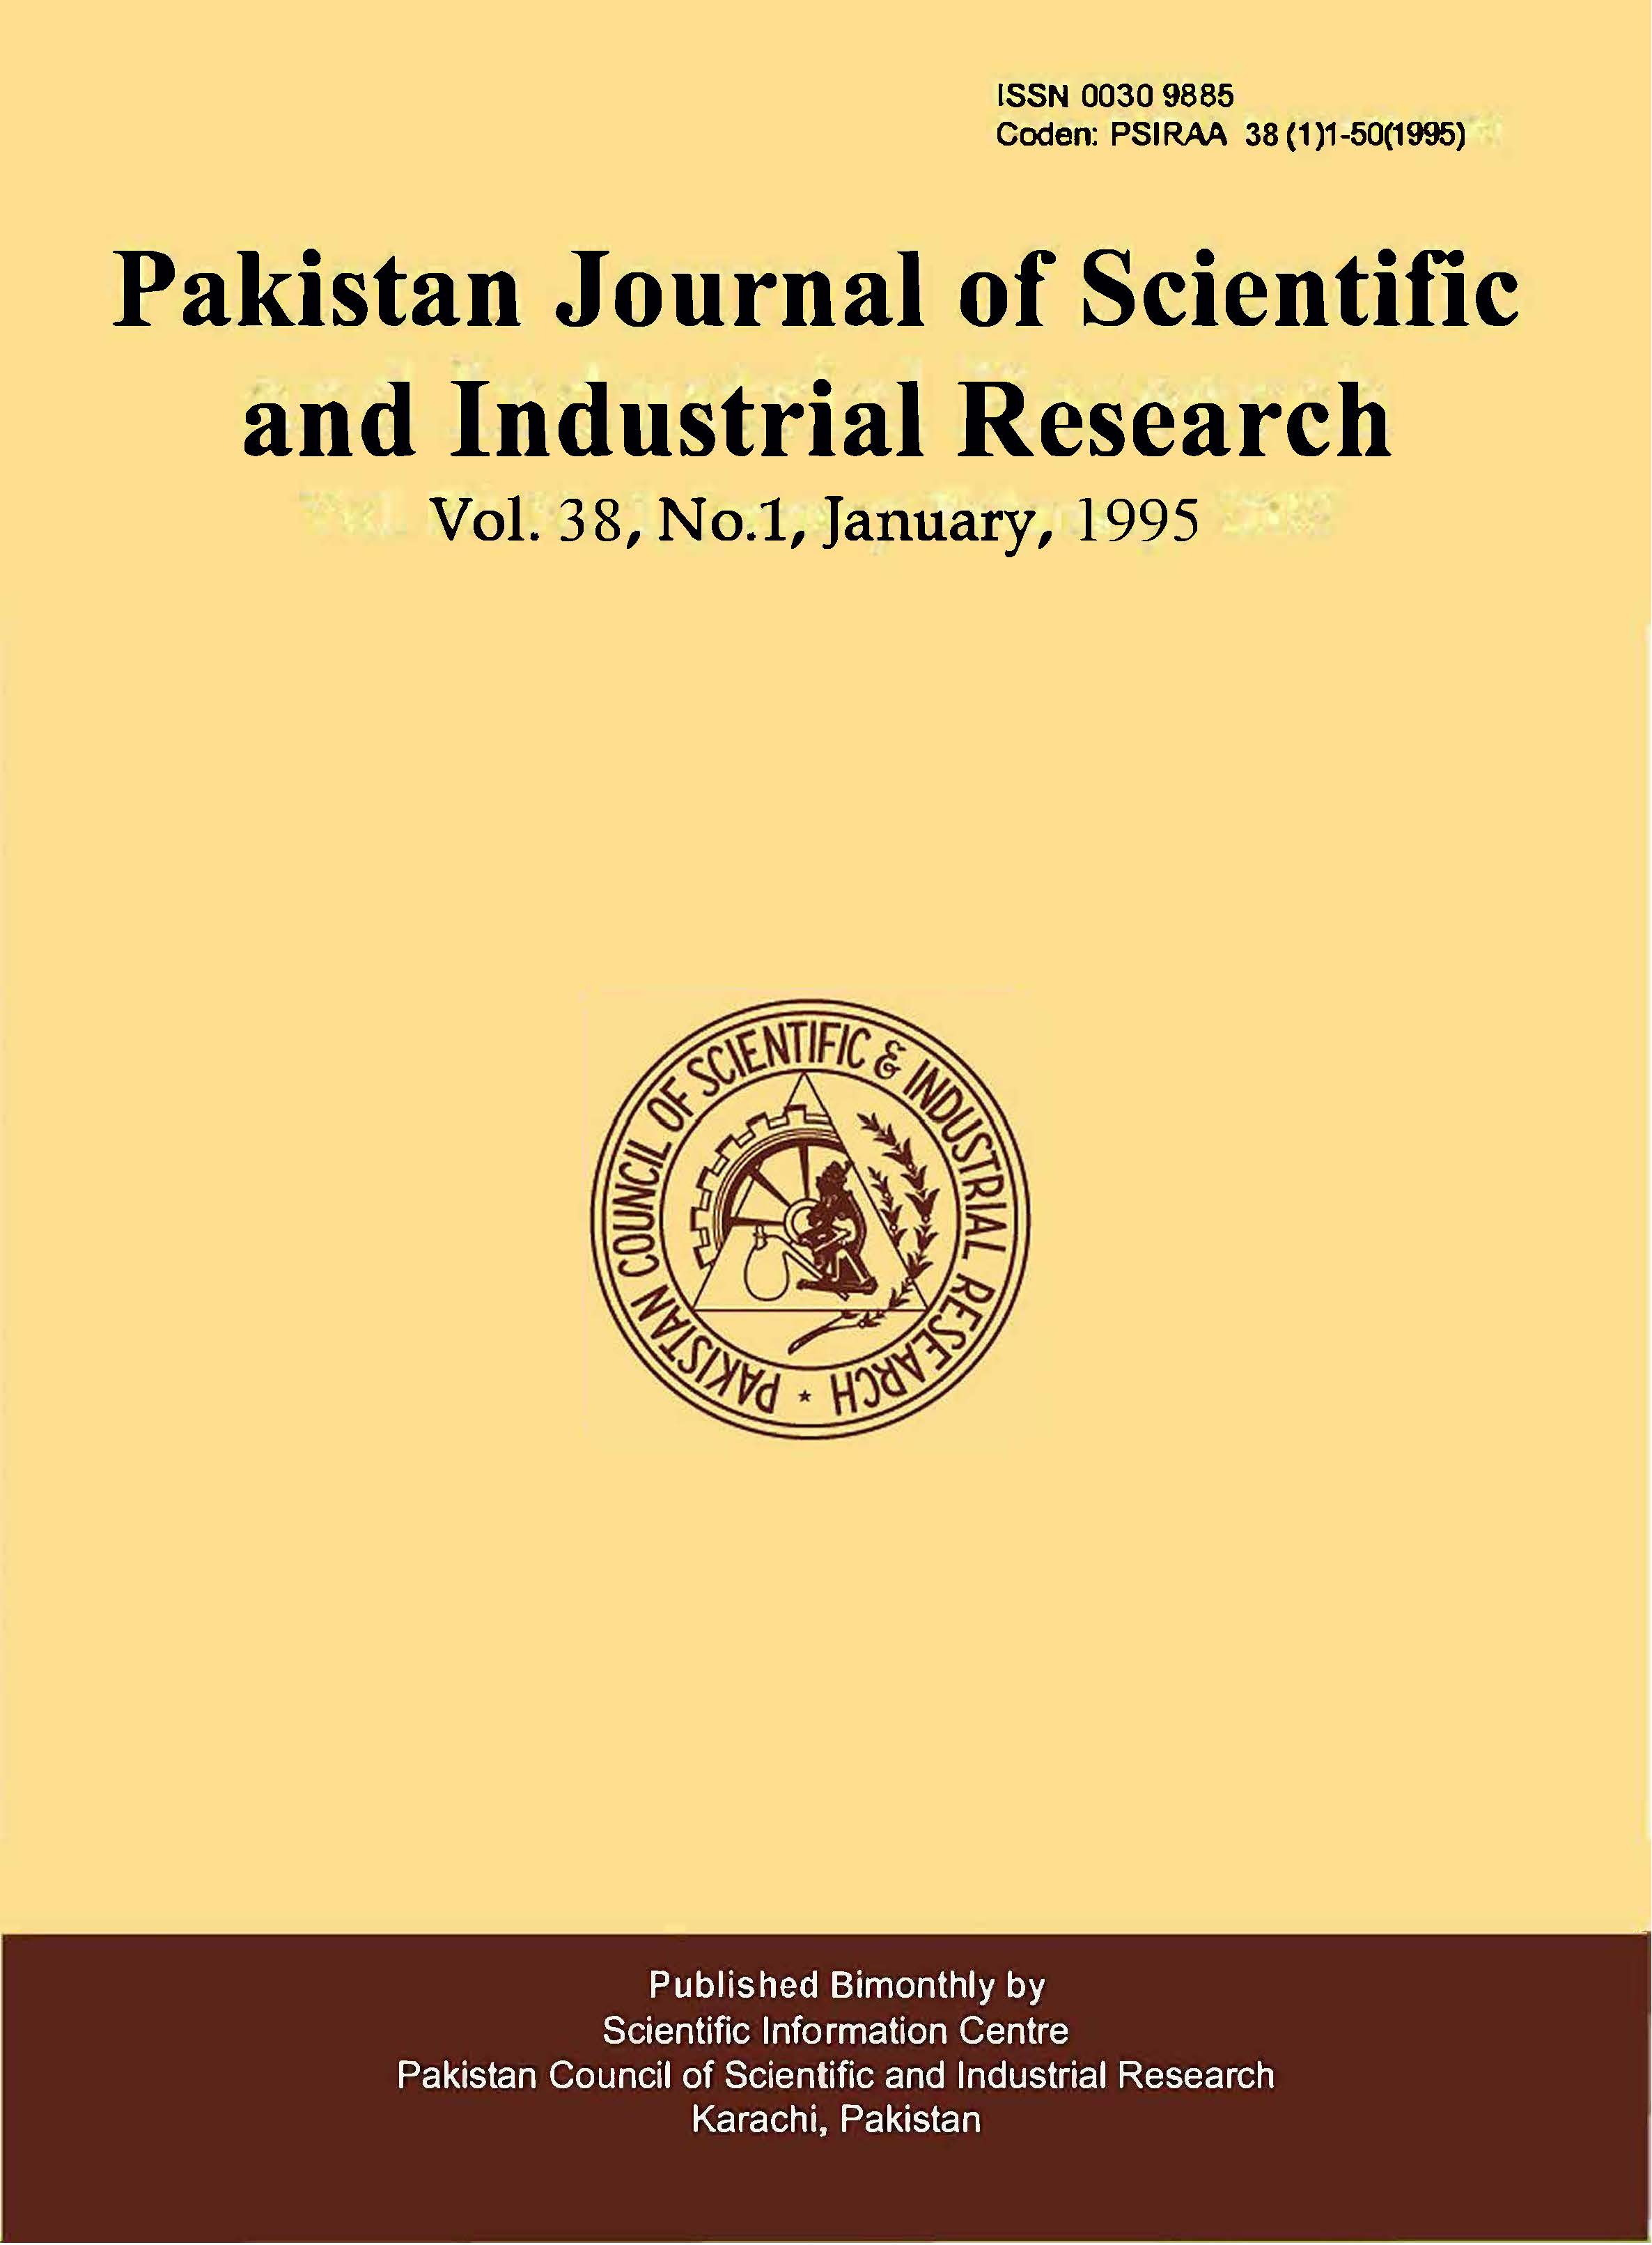 					View Vol. 38 No. 1 (1995): Pakistan Journal of Scientific and Industrial Research
				